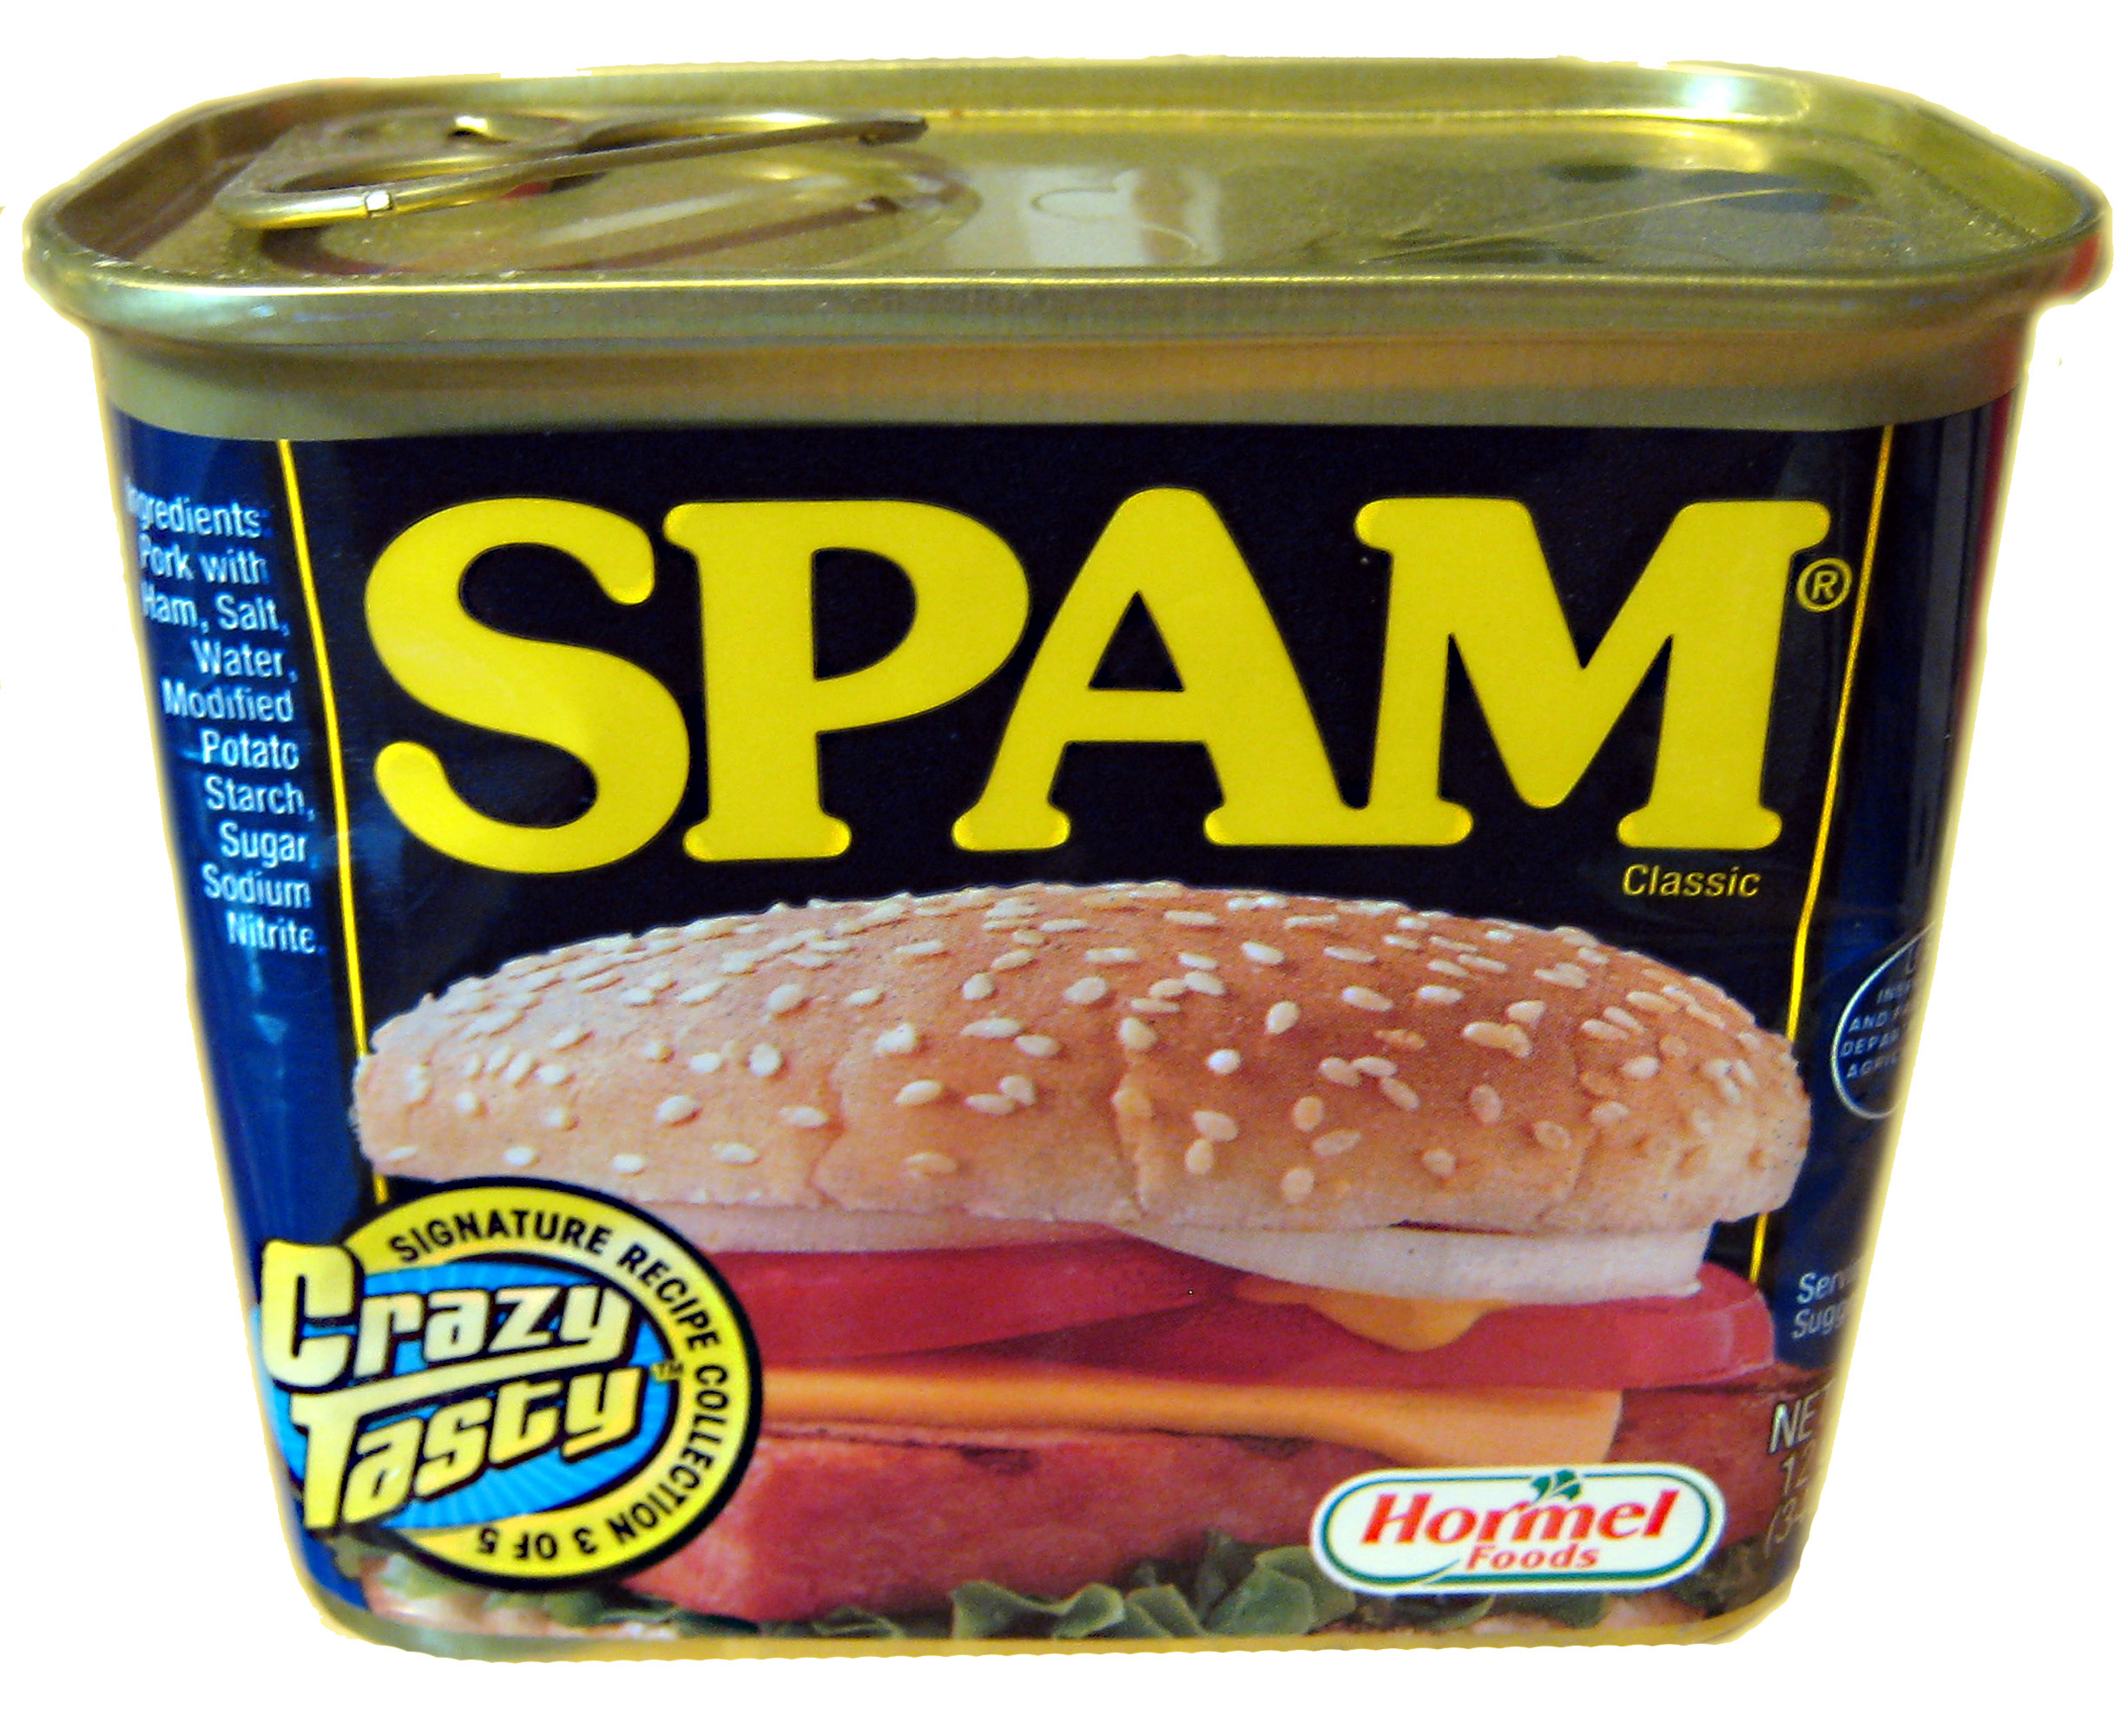 Can of Spam Classic meat.